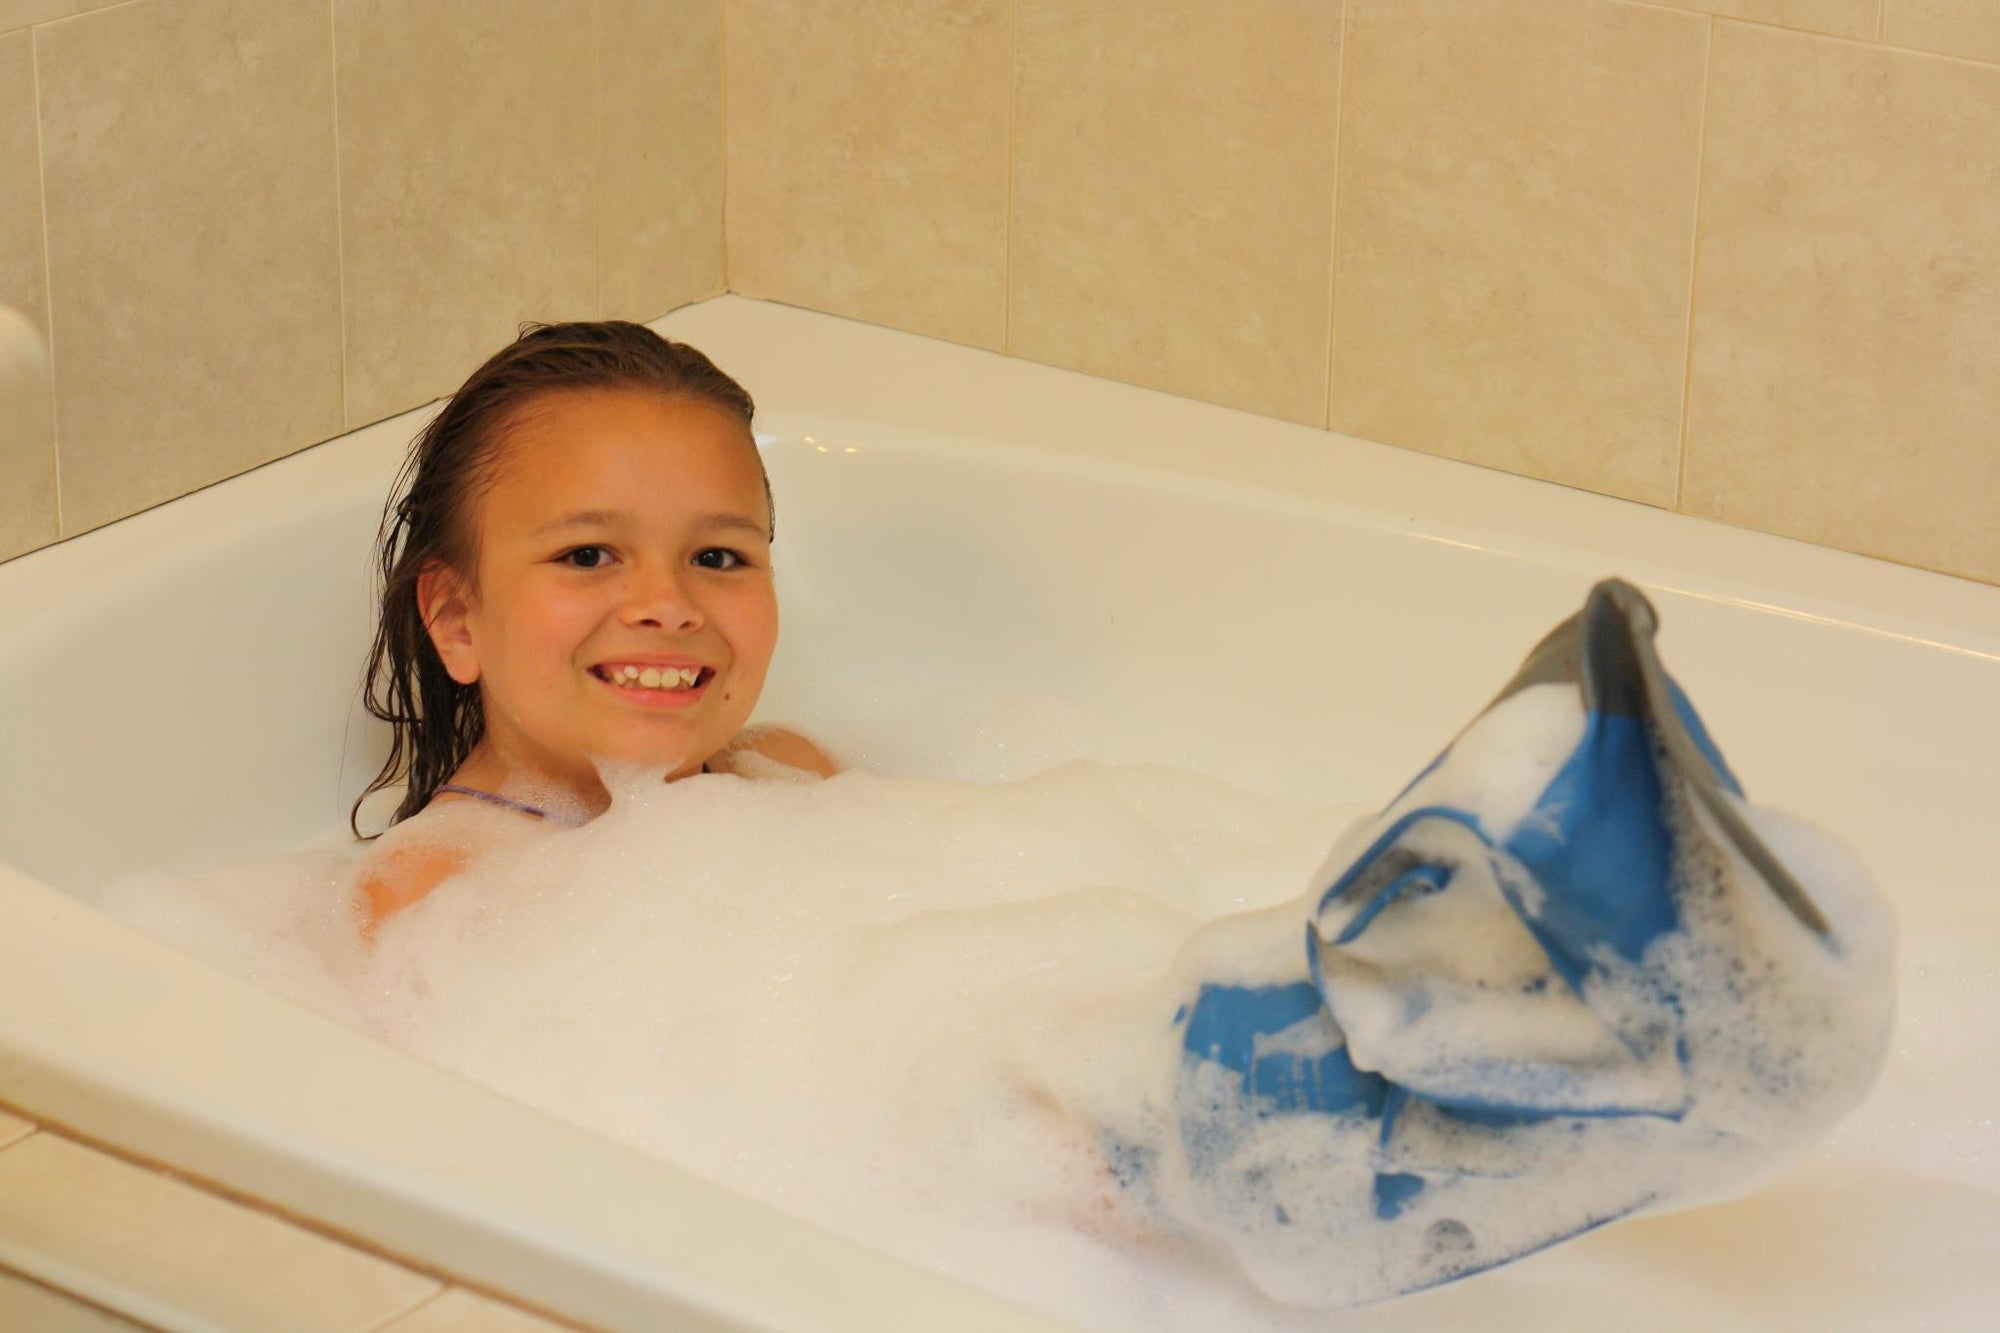 Dry Pro Waterproof Cast Cover Showering and Swimming for Kids and Adults